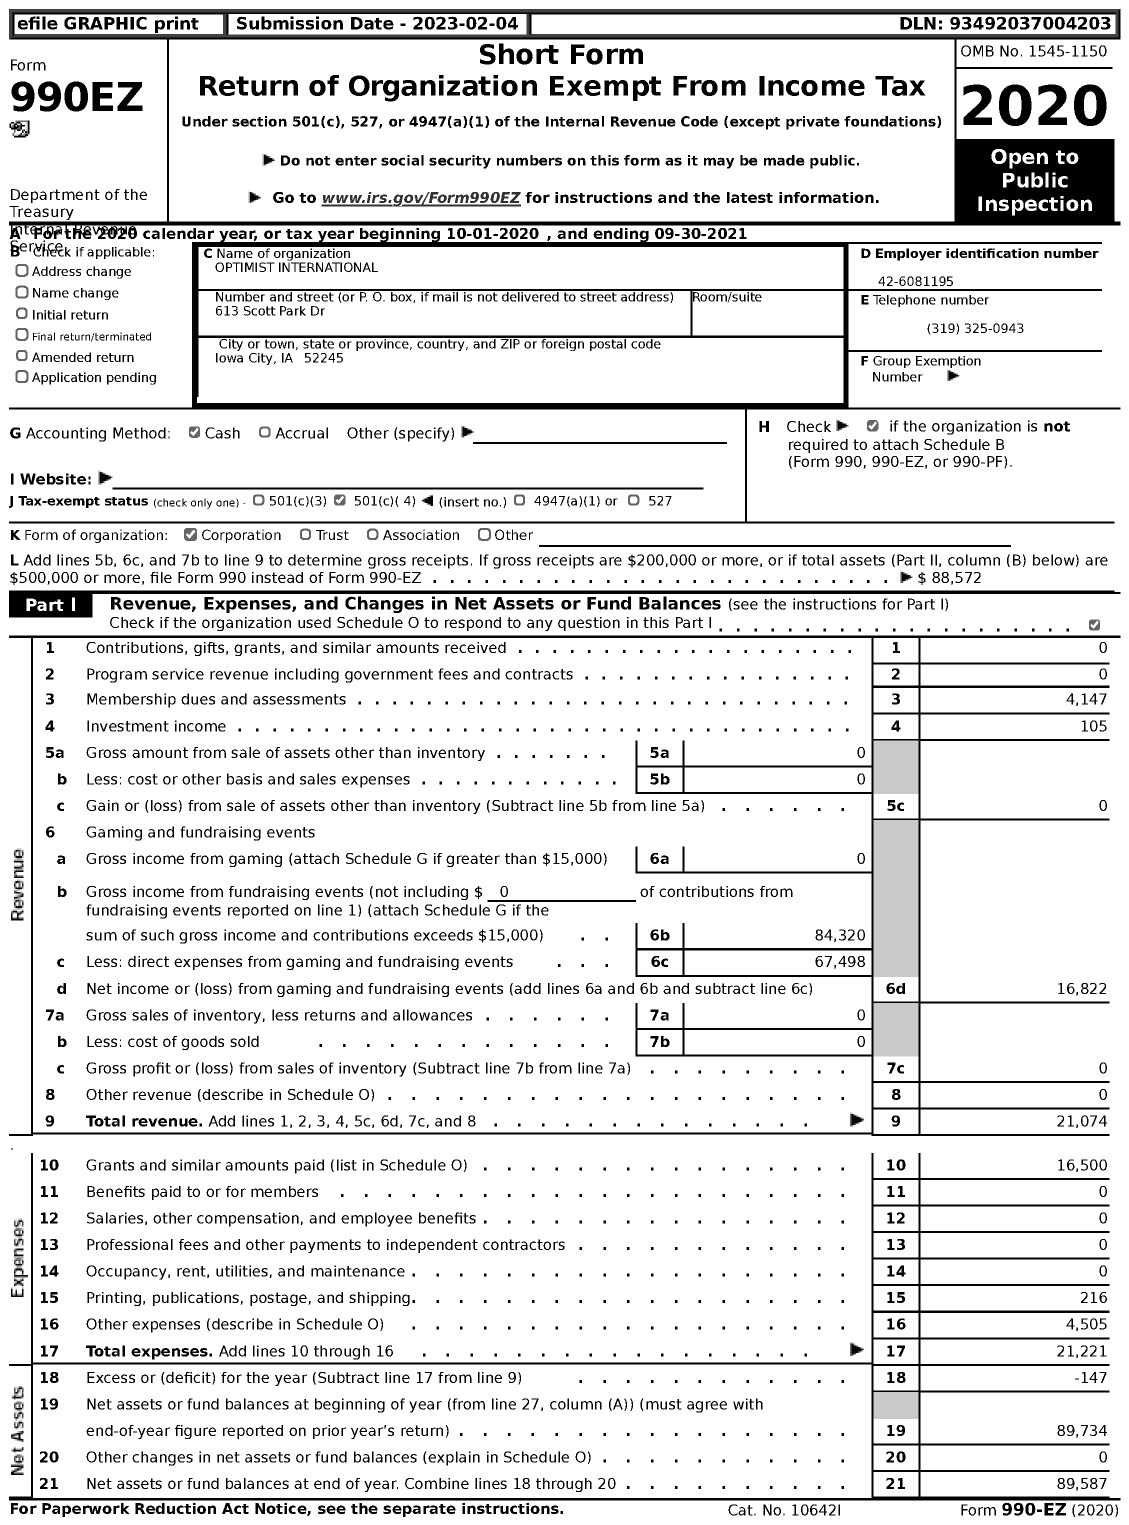 Image of first page of 2020 Form 990EZ for Optimist International - 40075 Oc of Iowa City Ia